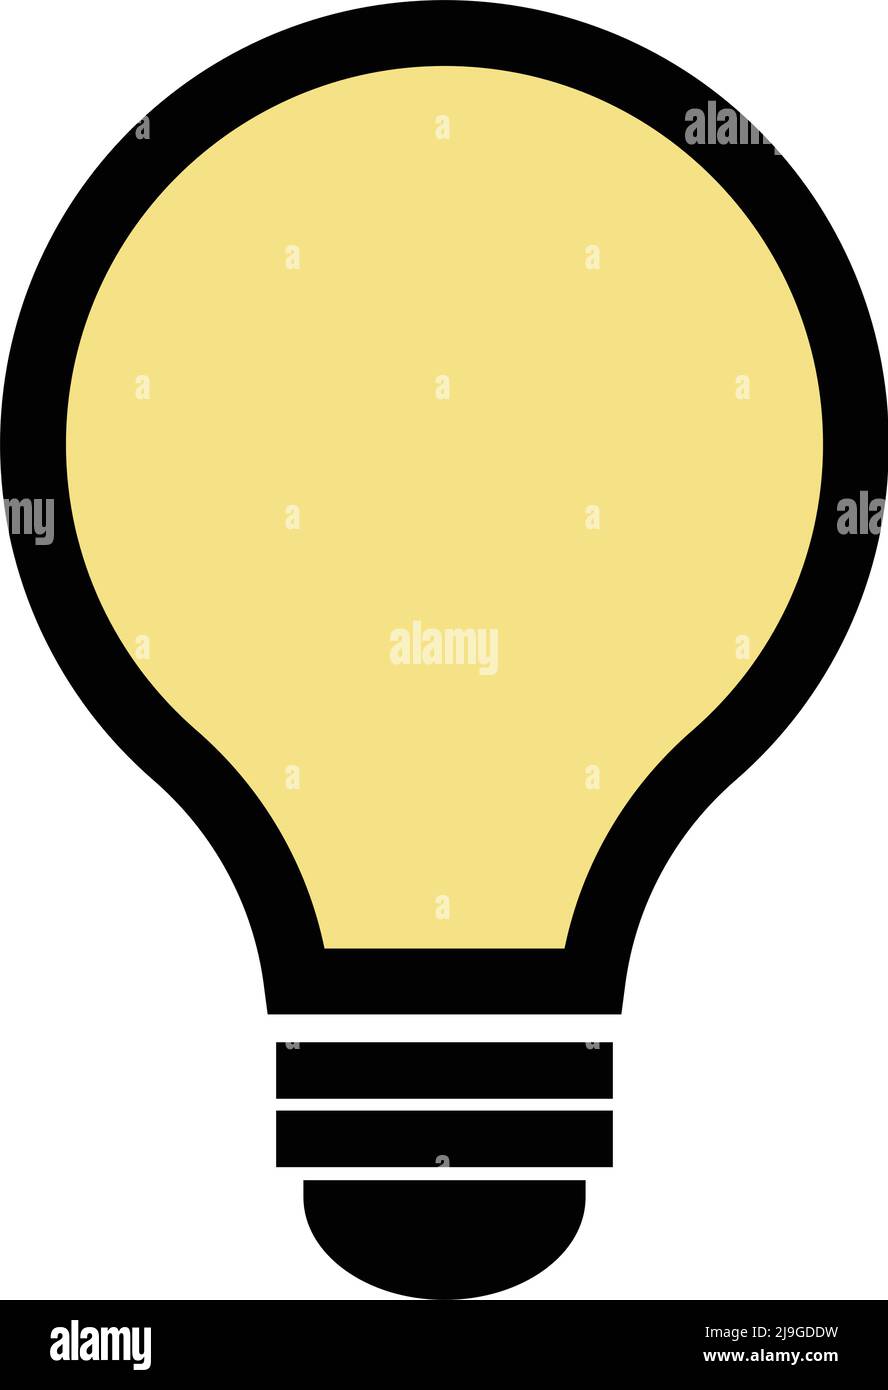 A simple light bulb icon. Can be used for inspiration, ideas, thoughts, hints, etc. Editable vector. Stock Vector